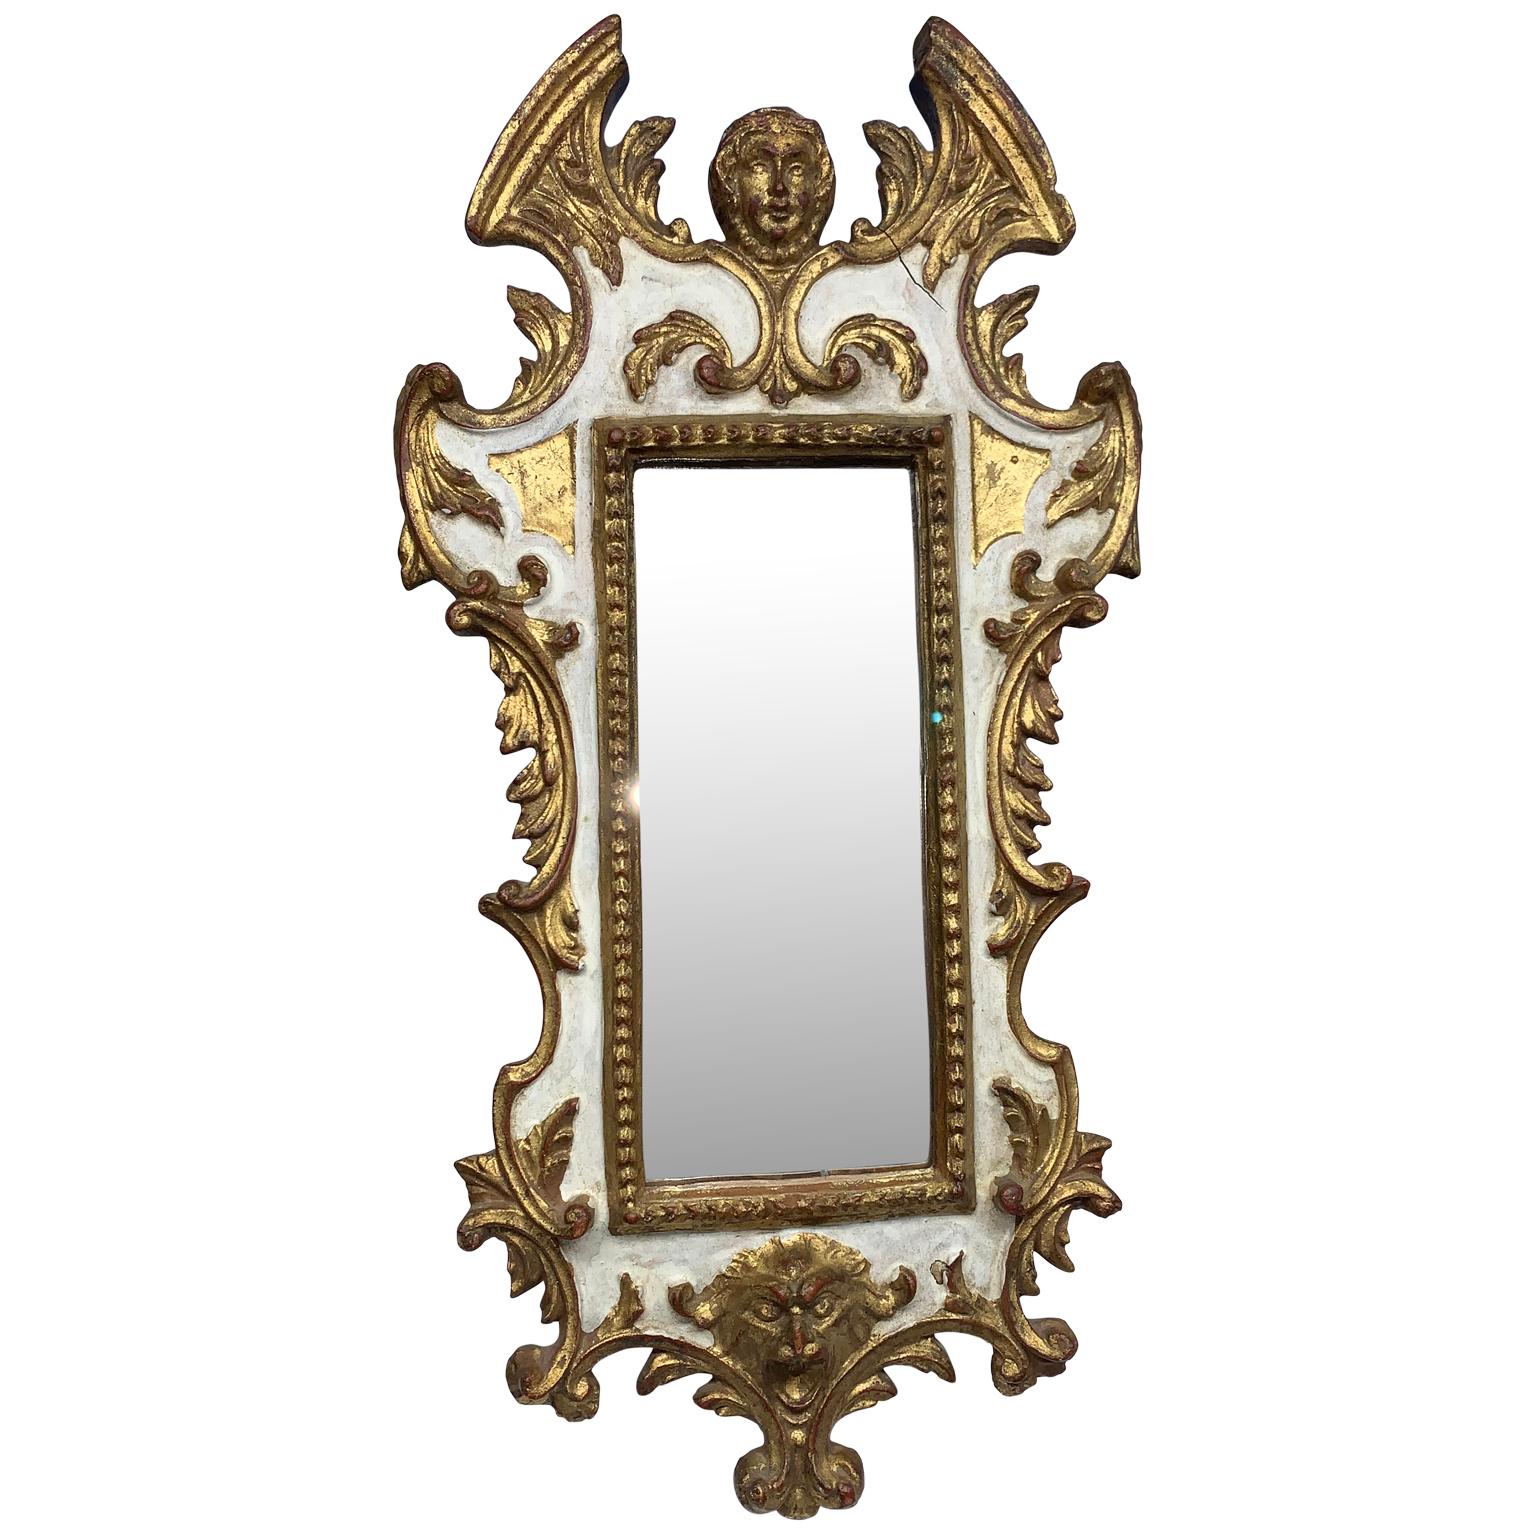 Small Italian Baroque Style Gilded Wall Mirror, Marked Florentia